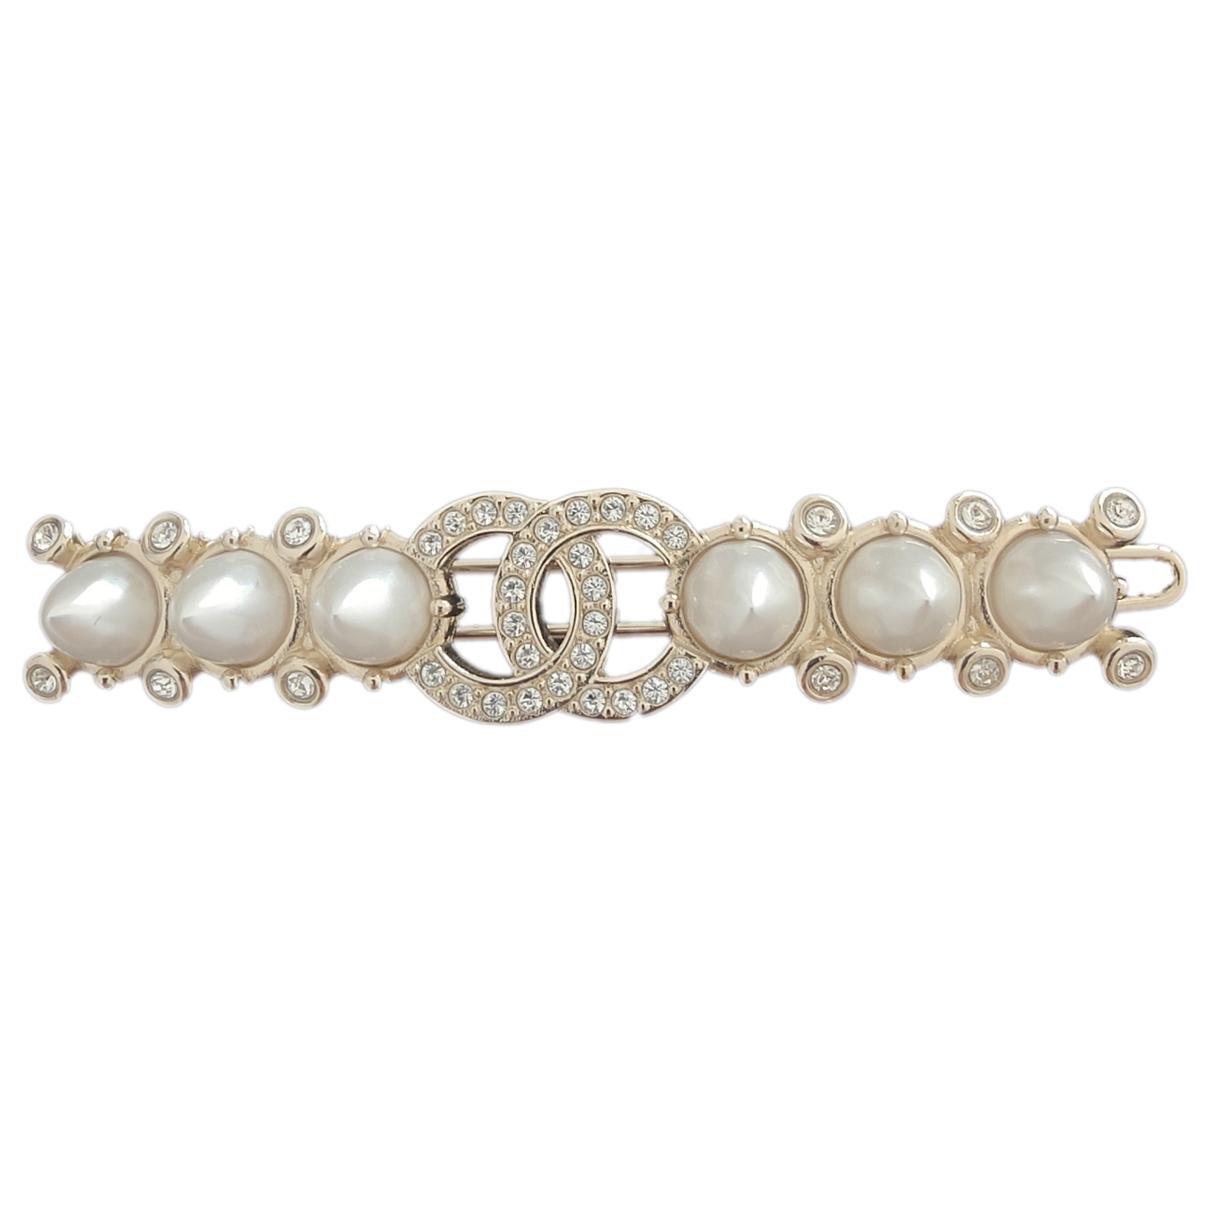 Chanel Women's Hair accessory  Buy or Sell your accessories